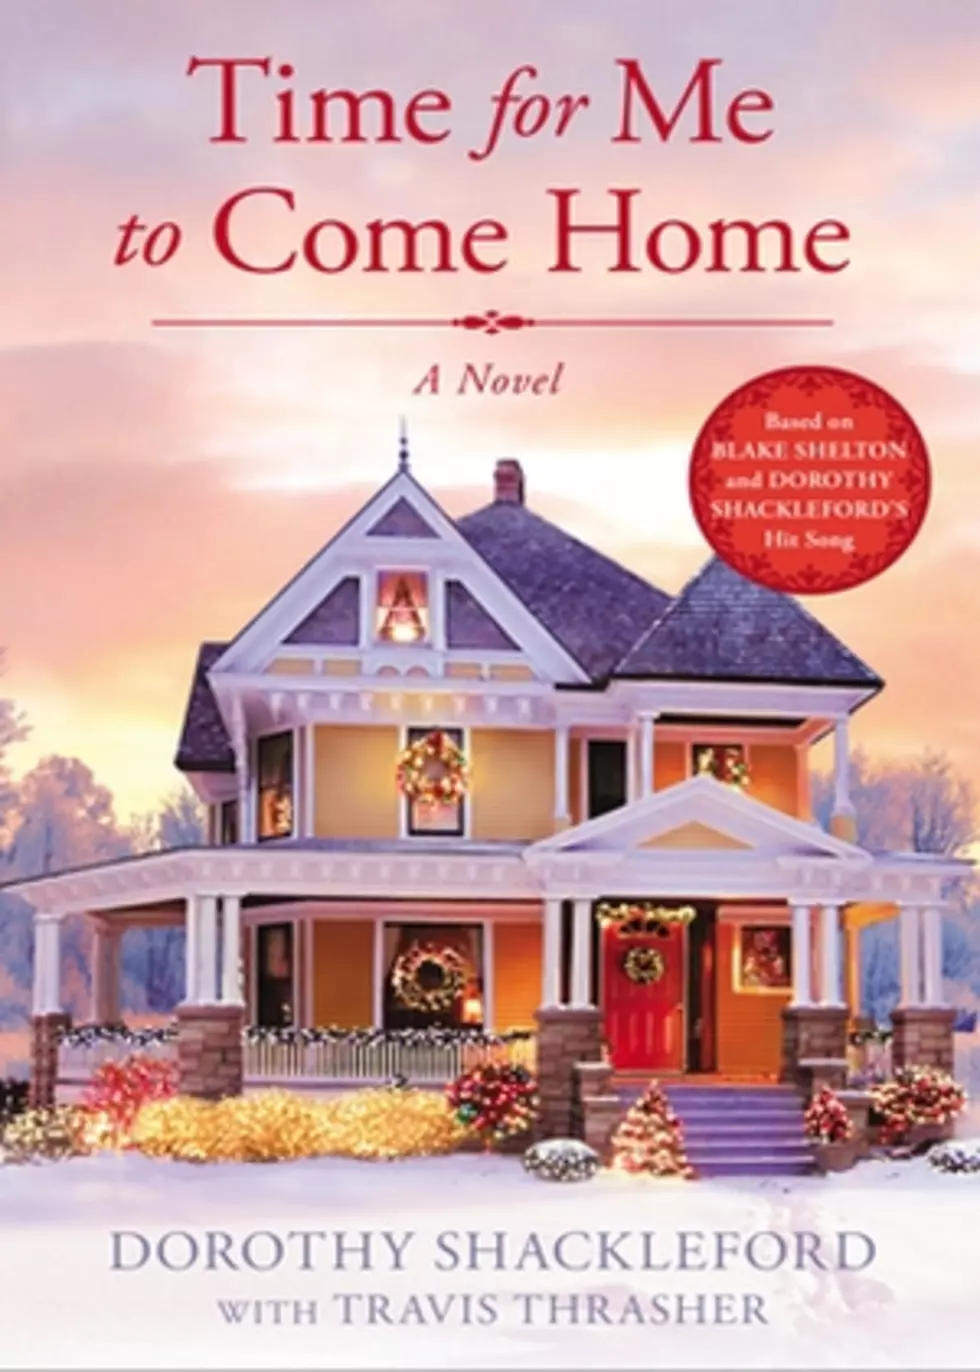 Blake Shelton&#8217;s Mother Pens Holiday Novel, &#8216;Time for Me to Come Home&#8217;